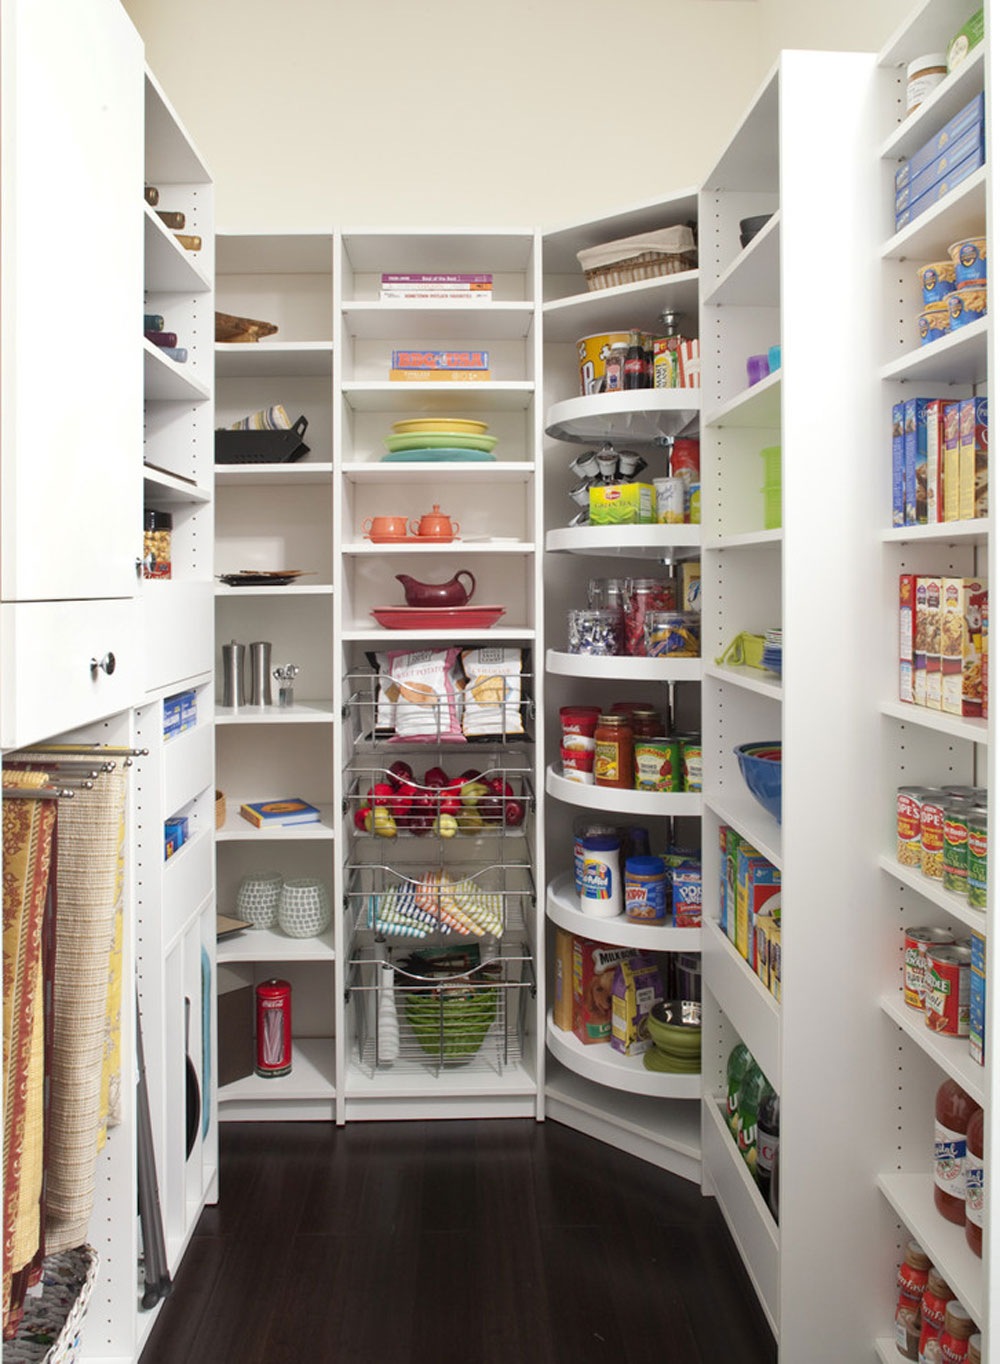 Well-designed-Pantry-to-keep-you-organized-by-The-Closet-Works-Inc. Pantry cabinet ideas: Shelving and storage ideas for your kitchen